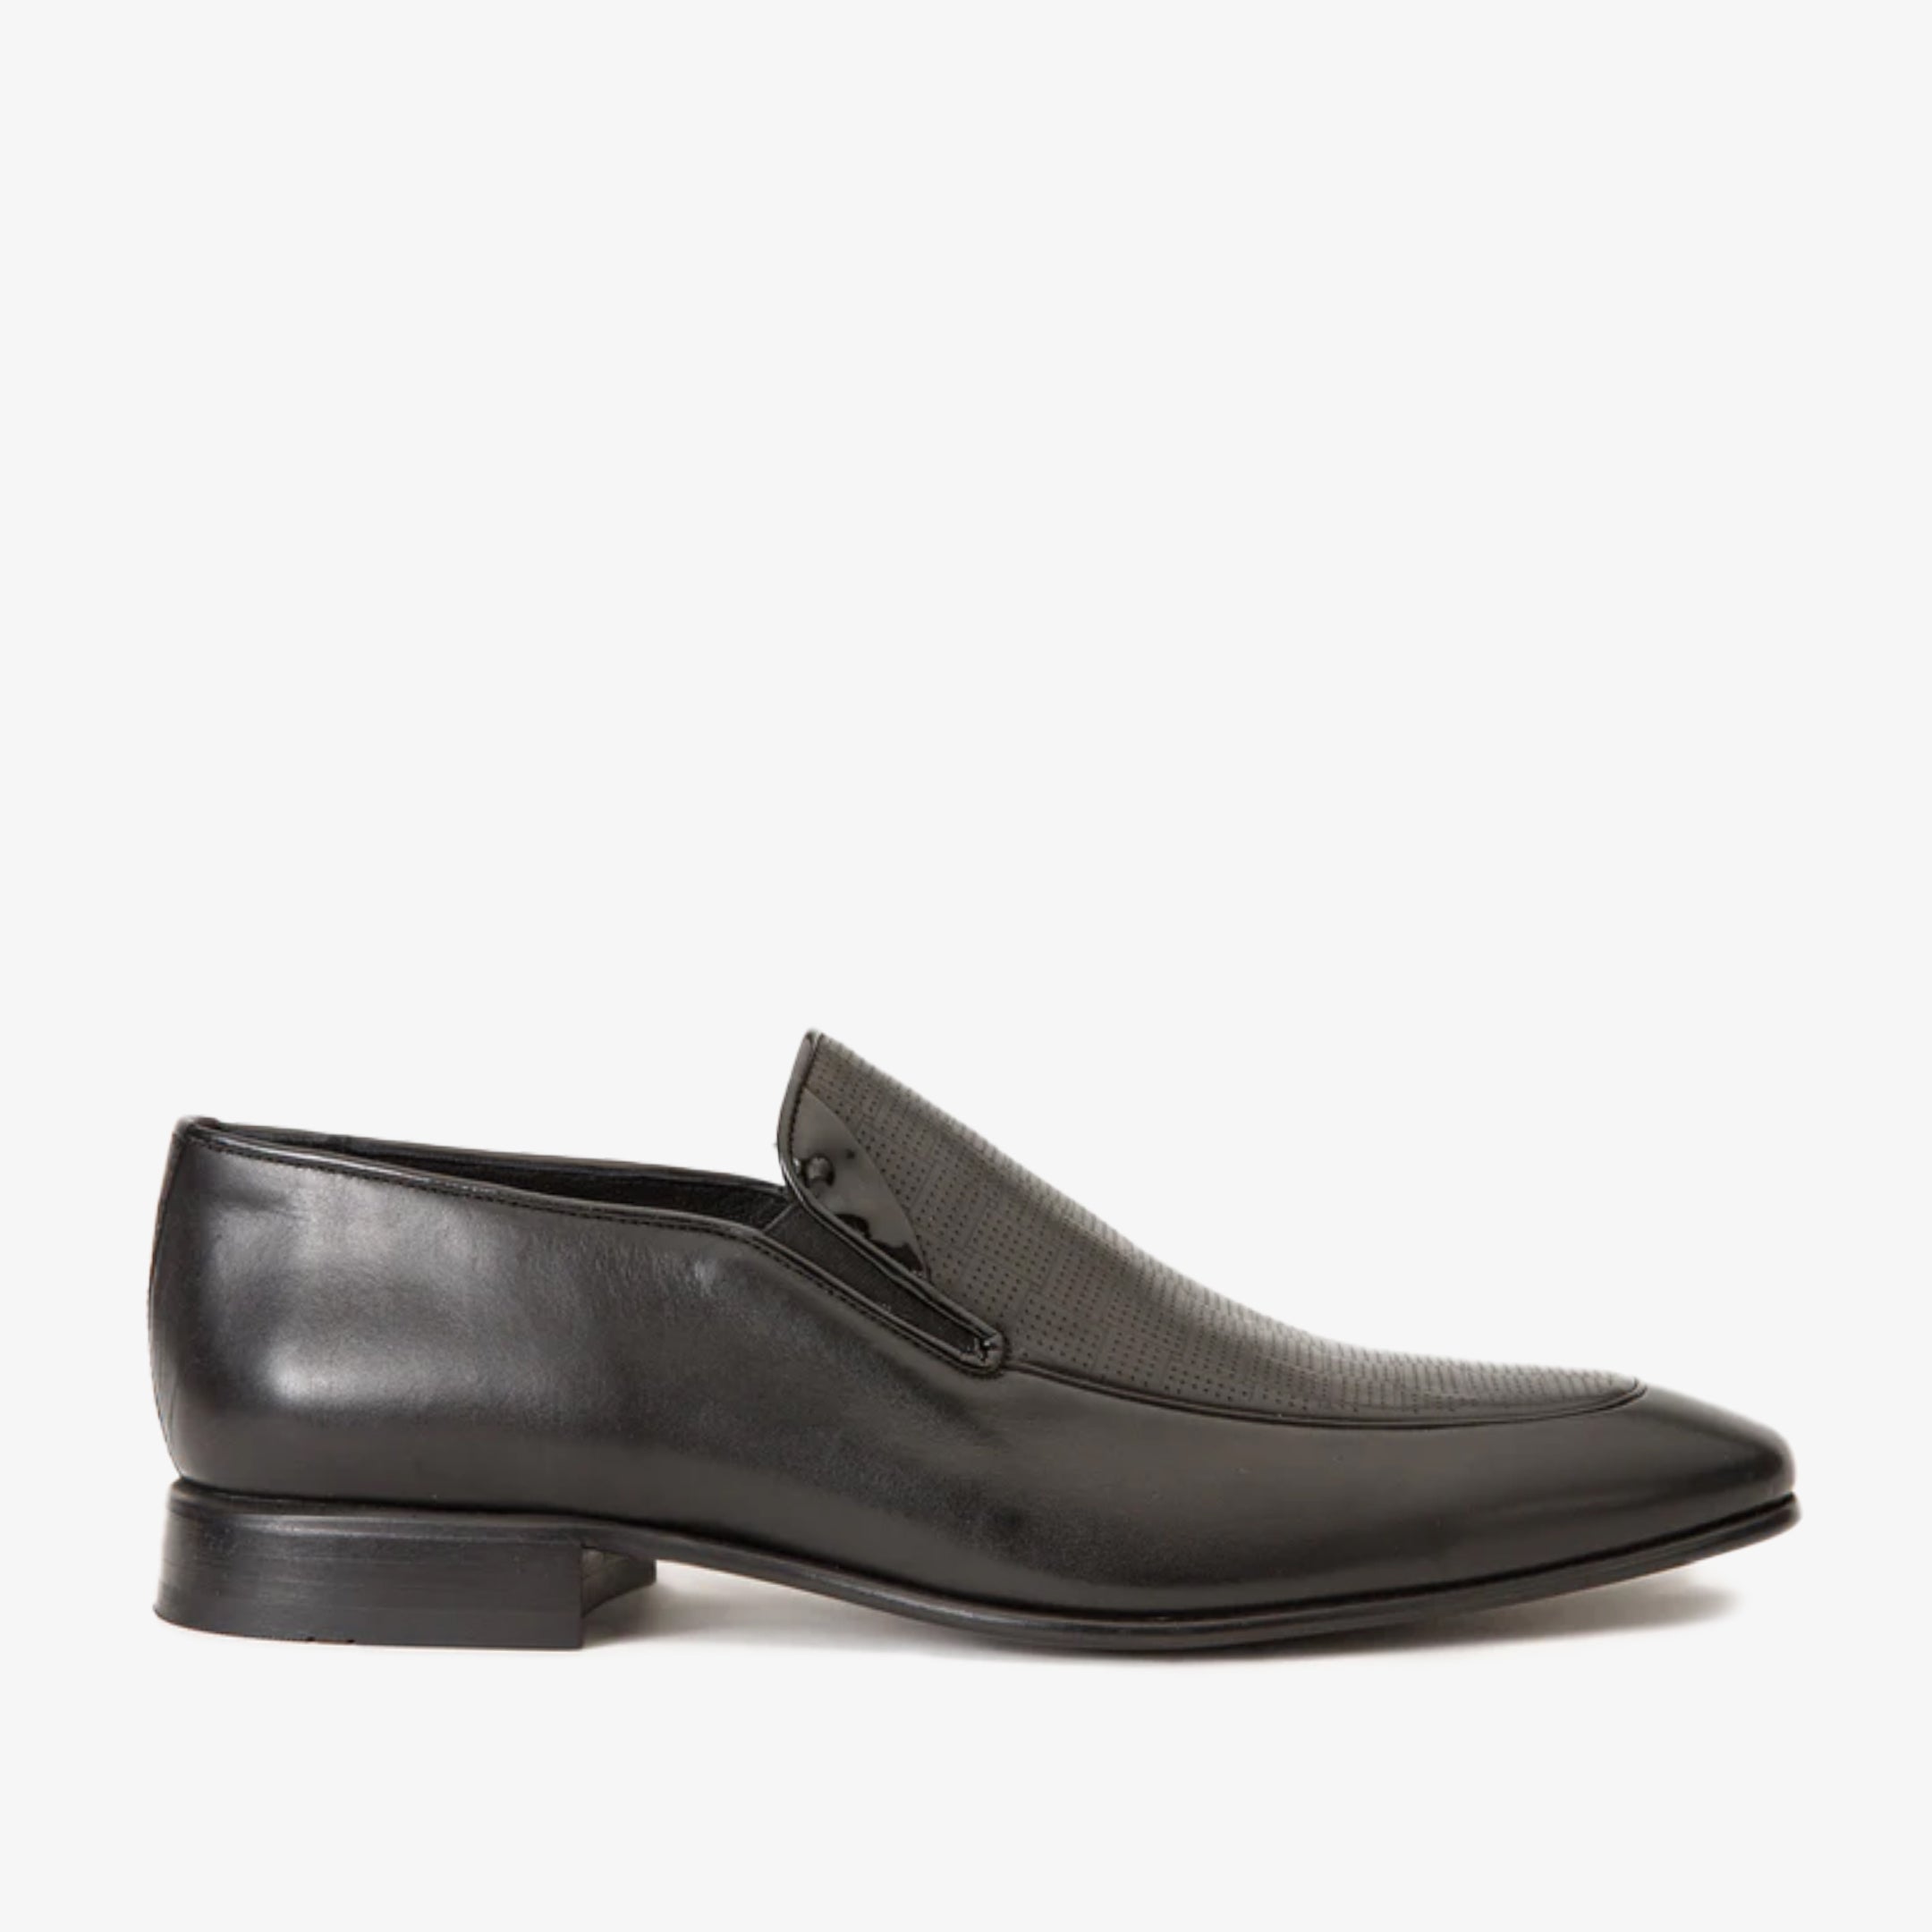 The Migues Black Leather Loafer Men Shoe